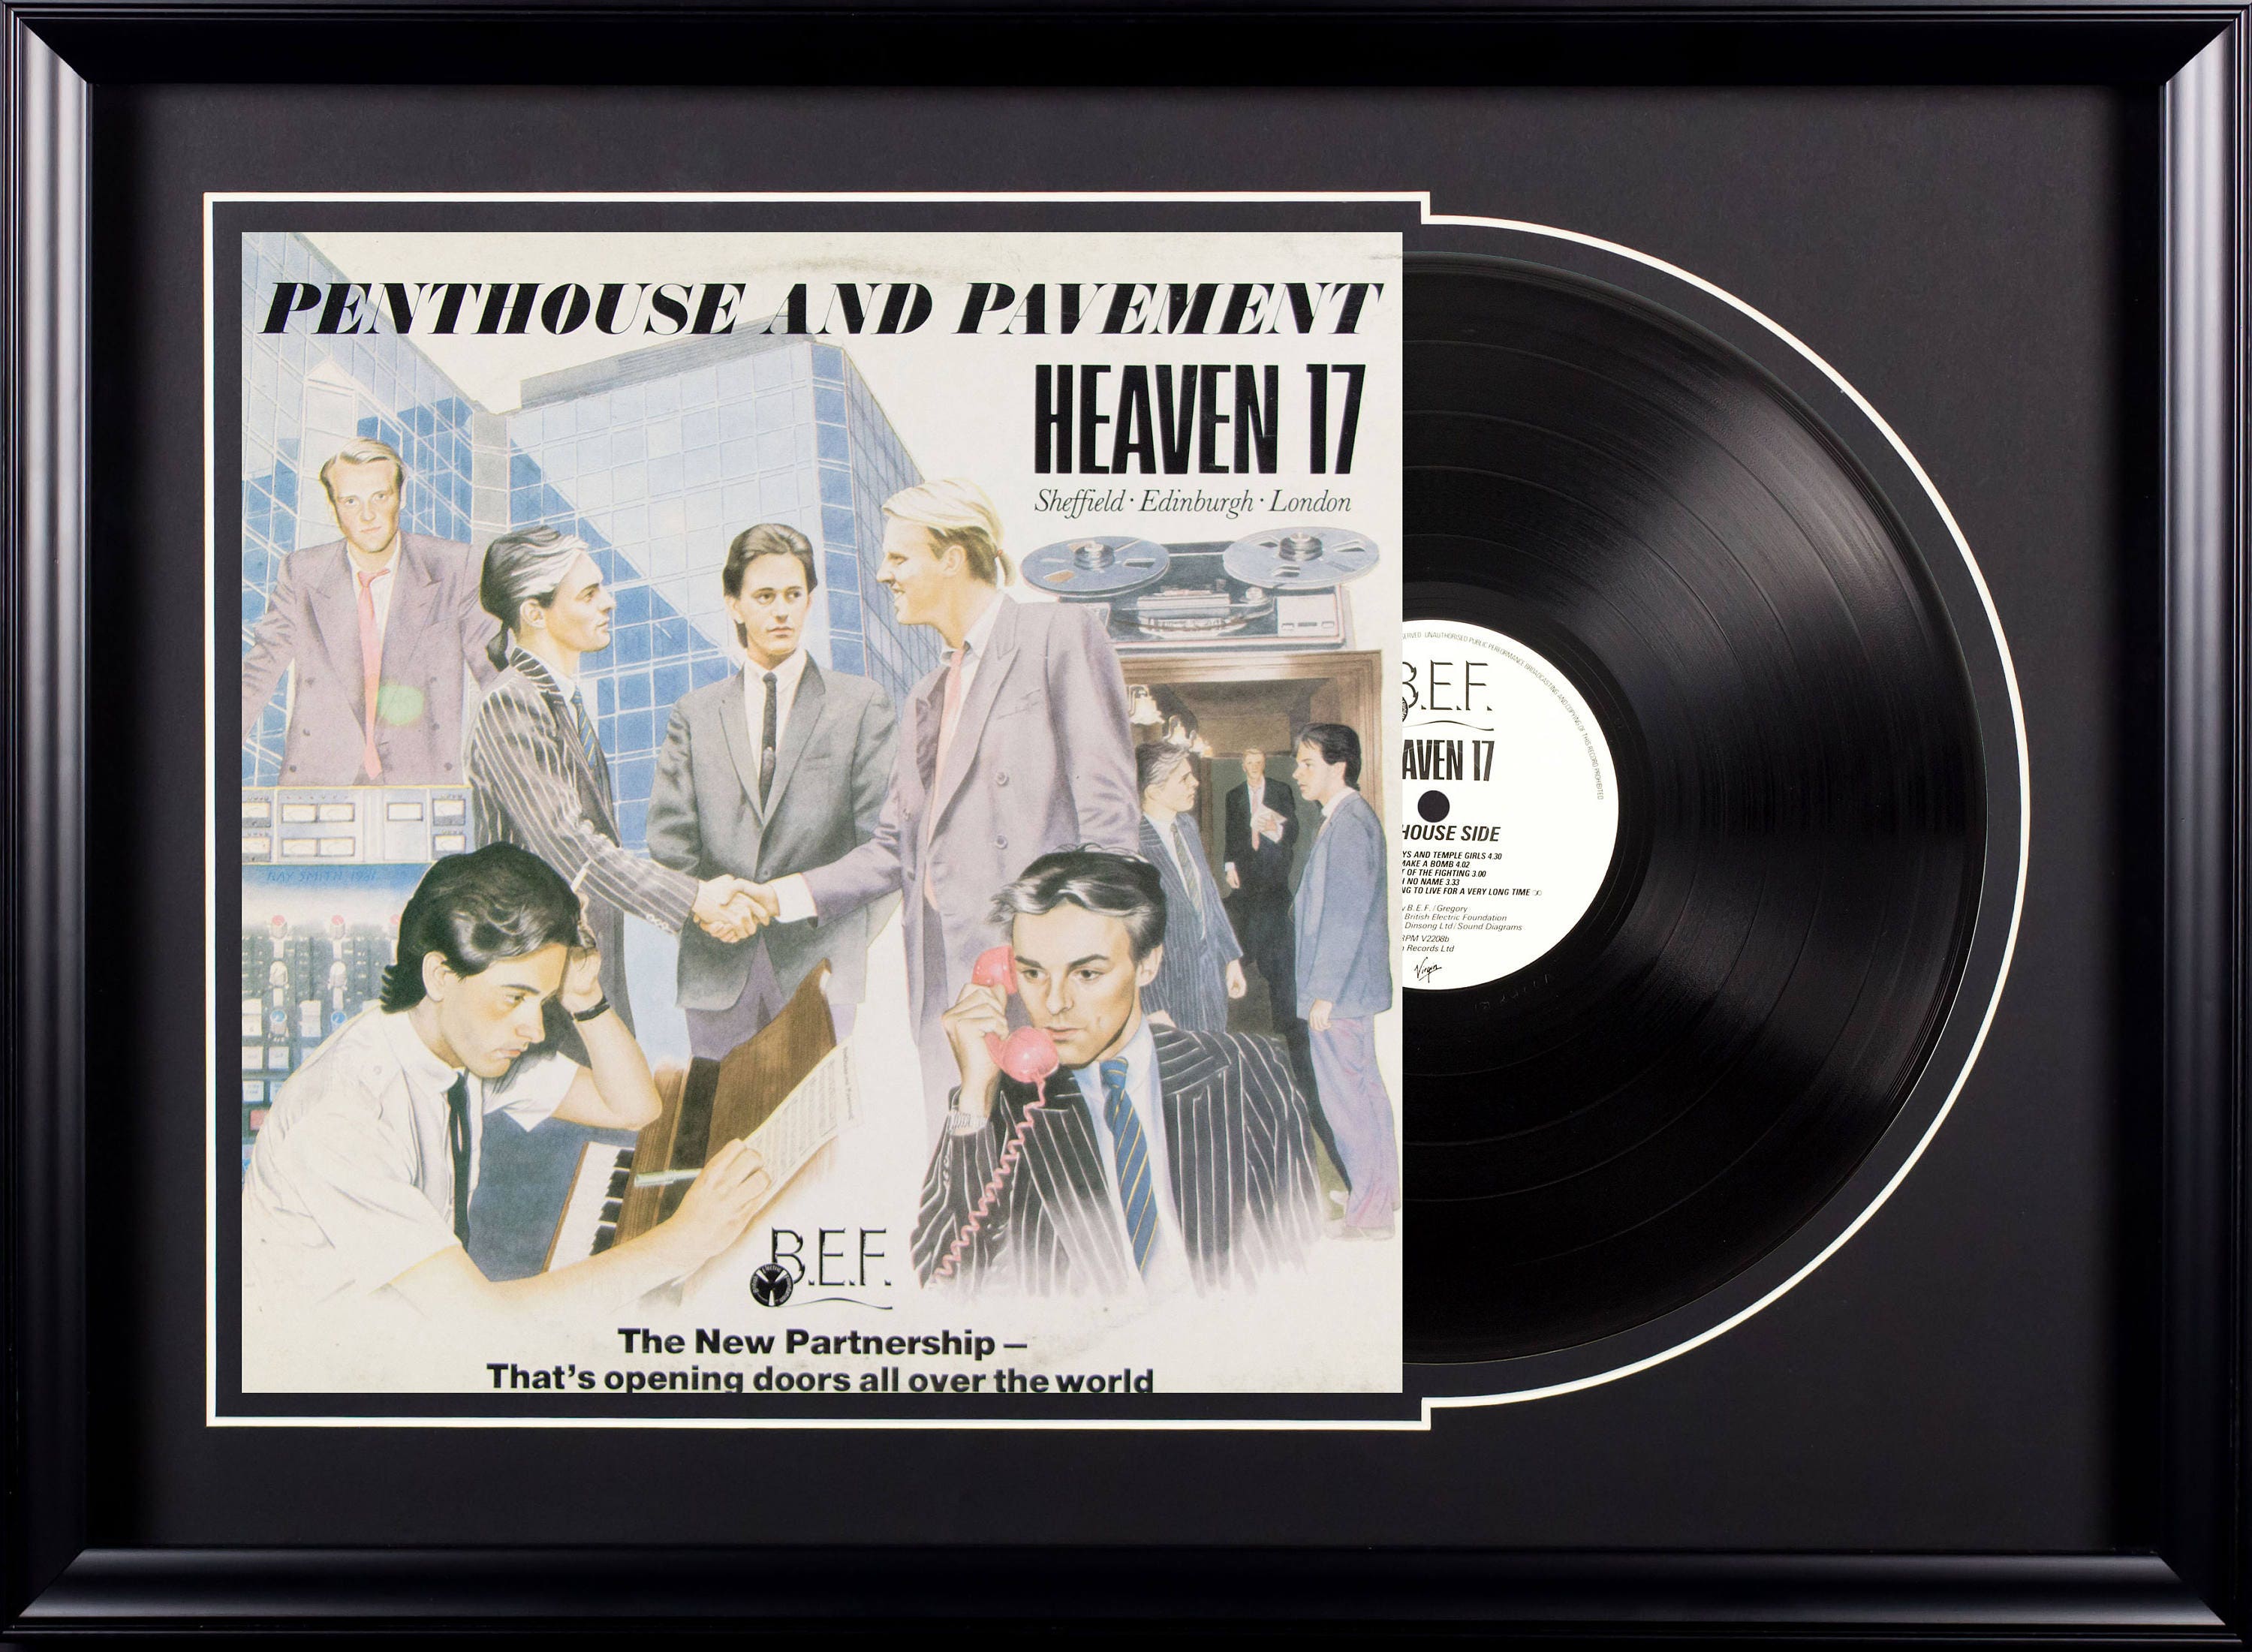 Heaven 17 Penthouse And Pavement Vintage Album Deluxe Framed